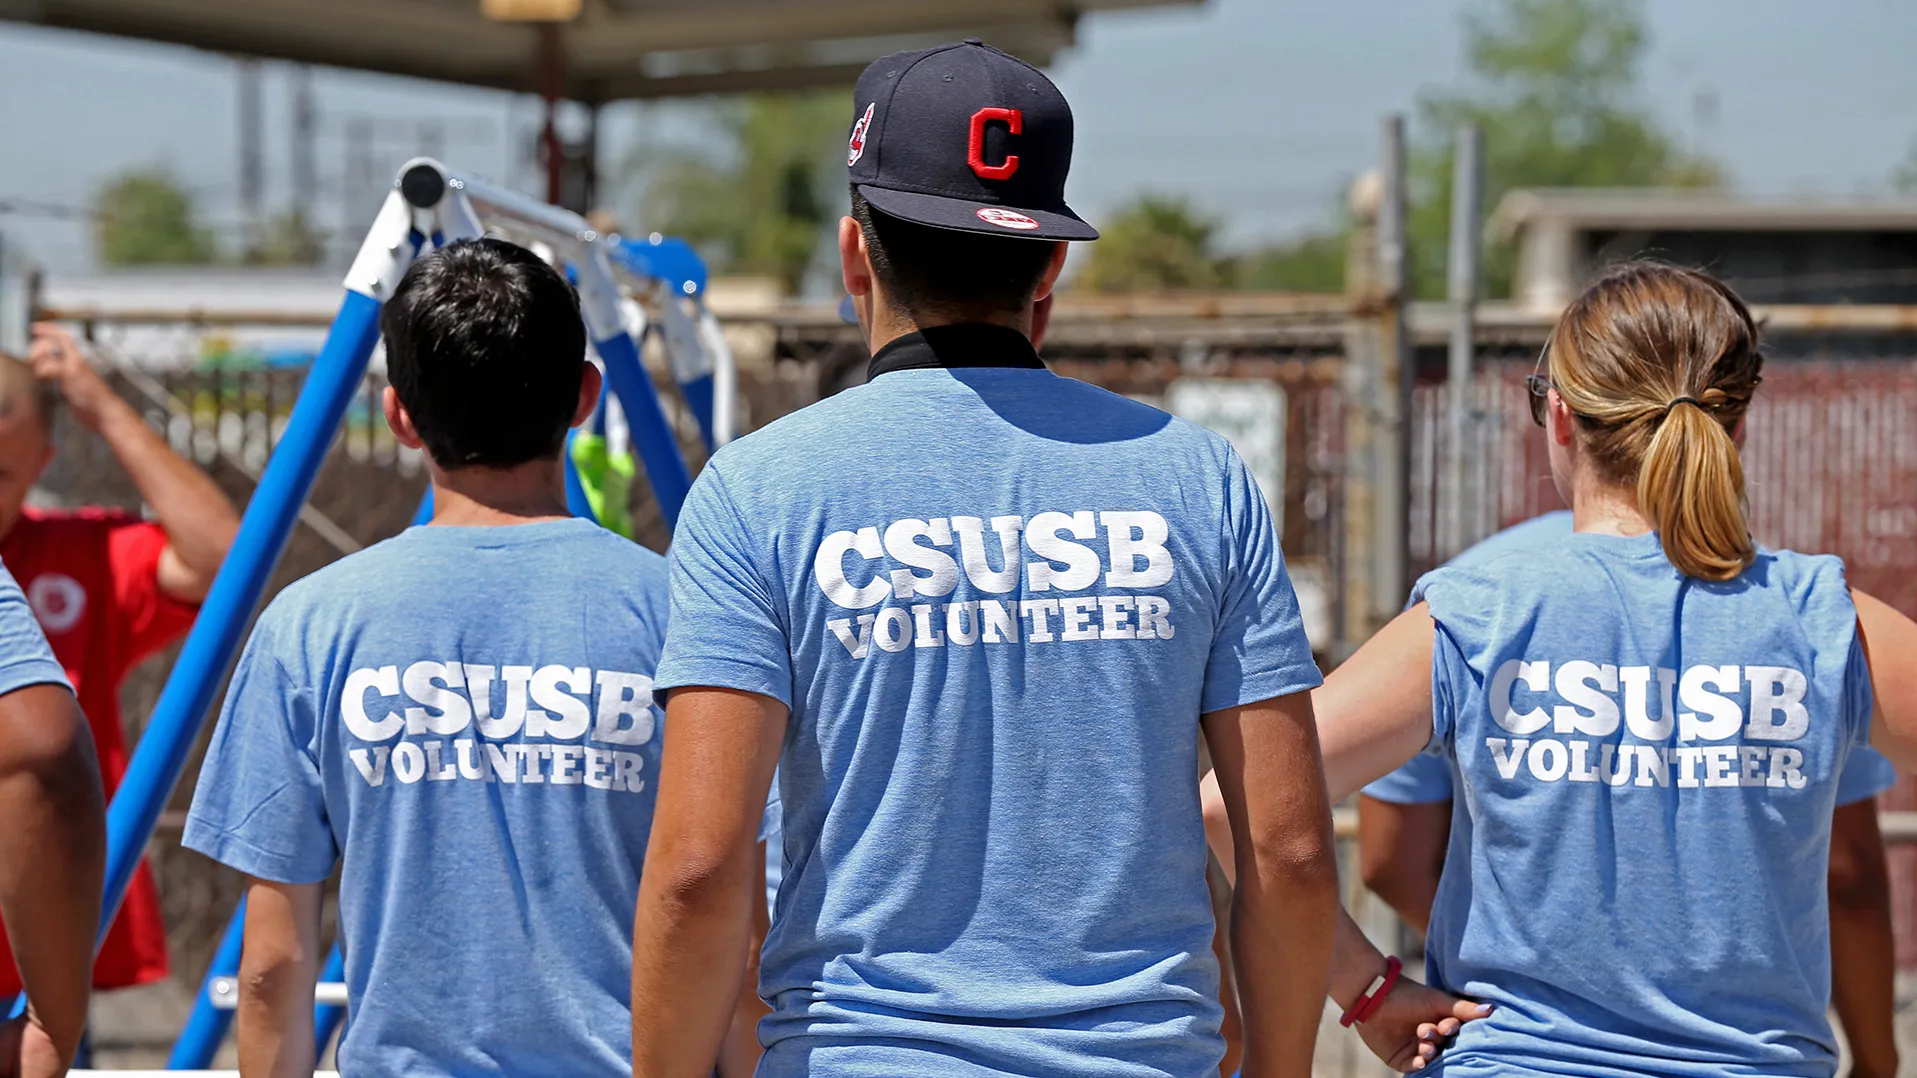 Students in T-shirts showing CSUSB Volunteer on their backs.